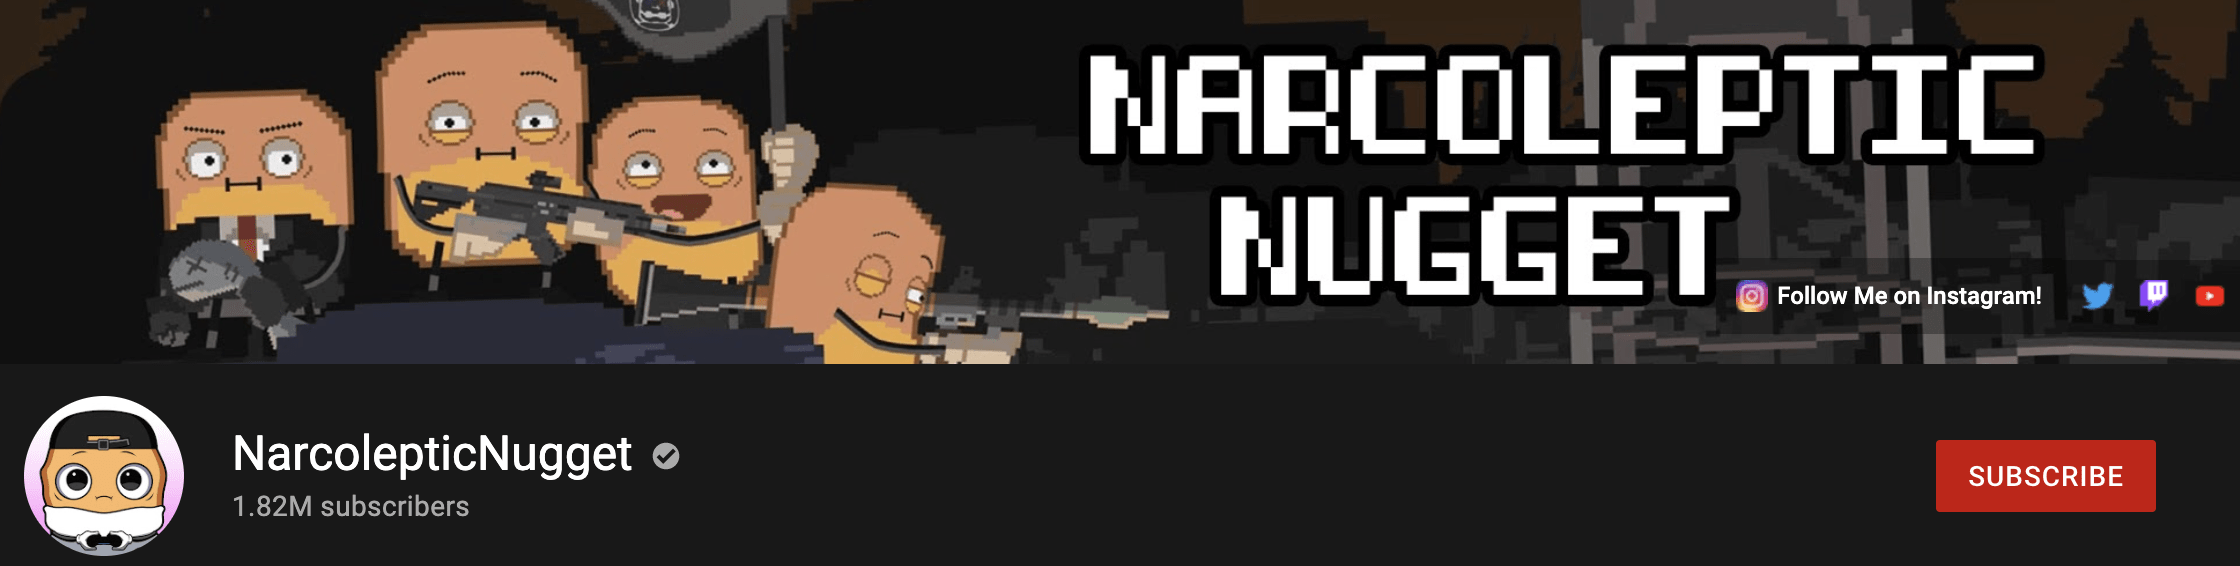 NarcolepticNugget Main image